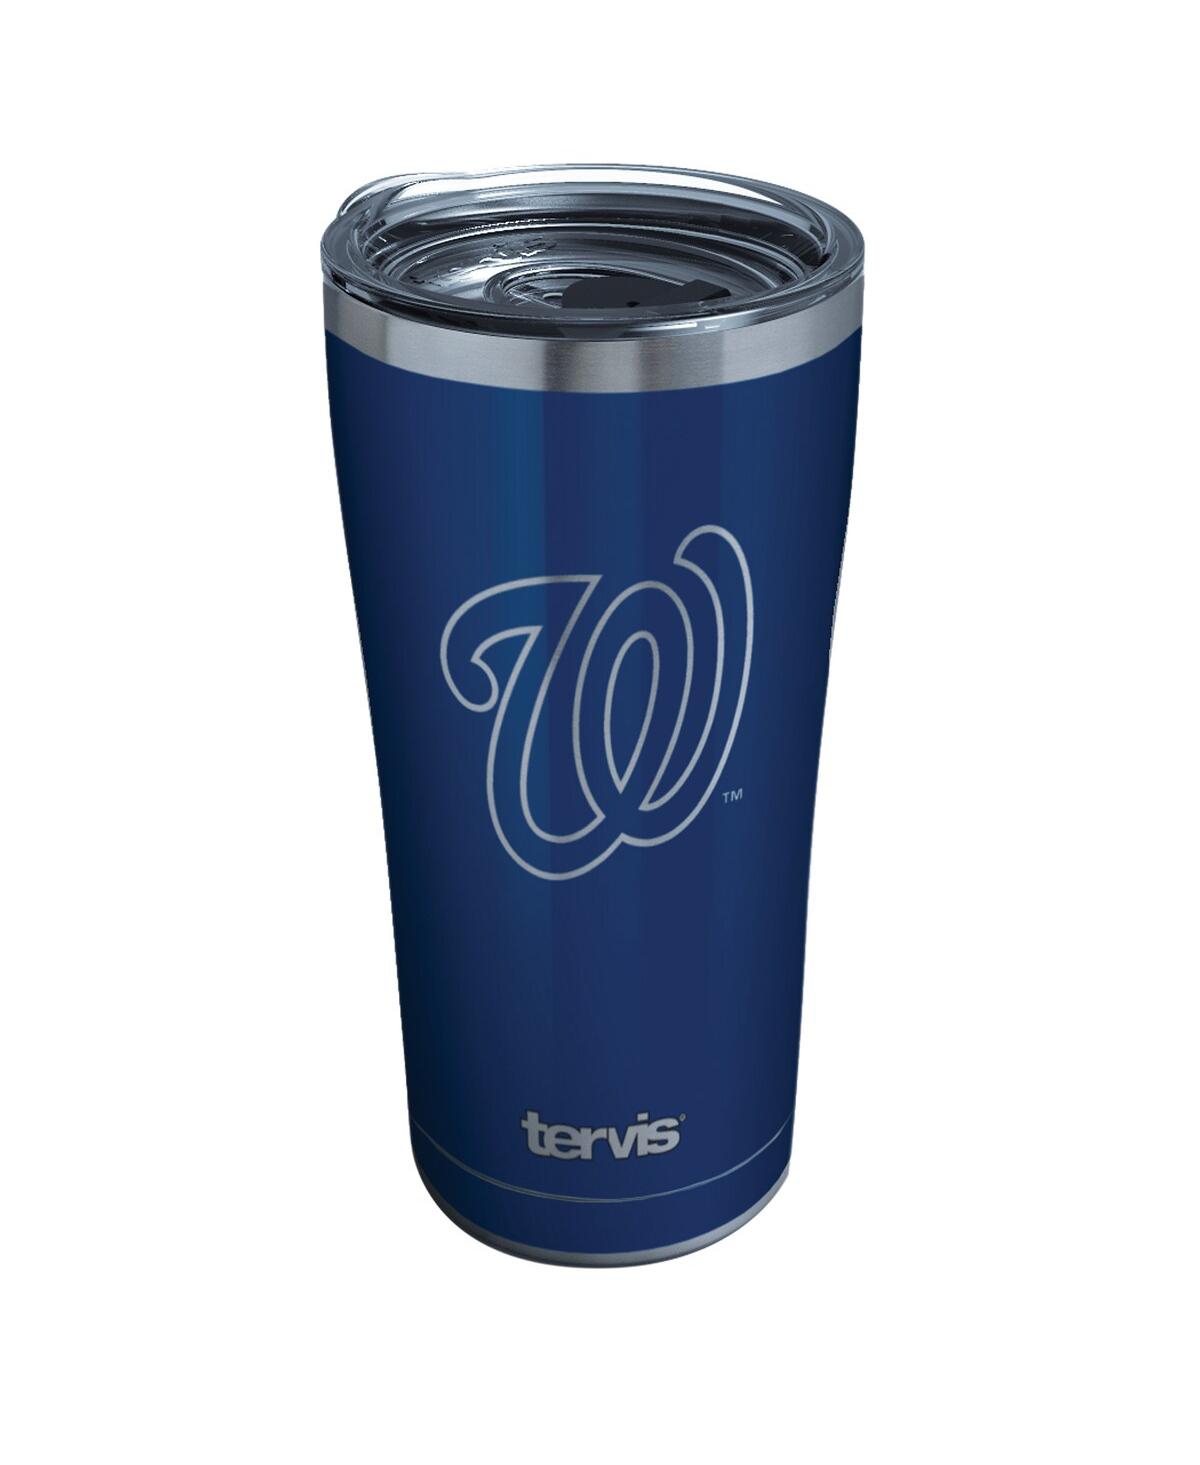 Tervis Tumbler Washington Nationals 20 oz Roots Tumbler With Slider Lid In Navy